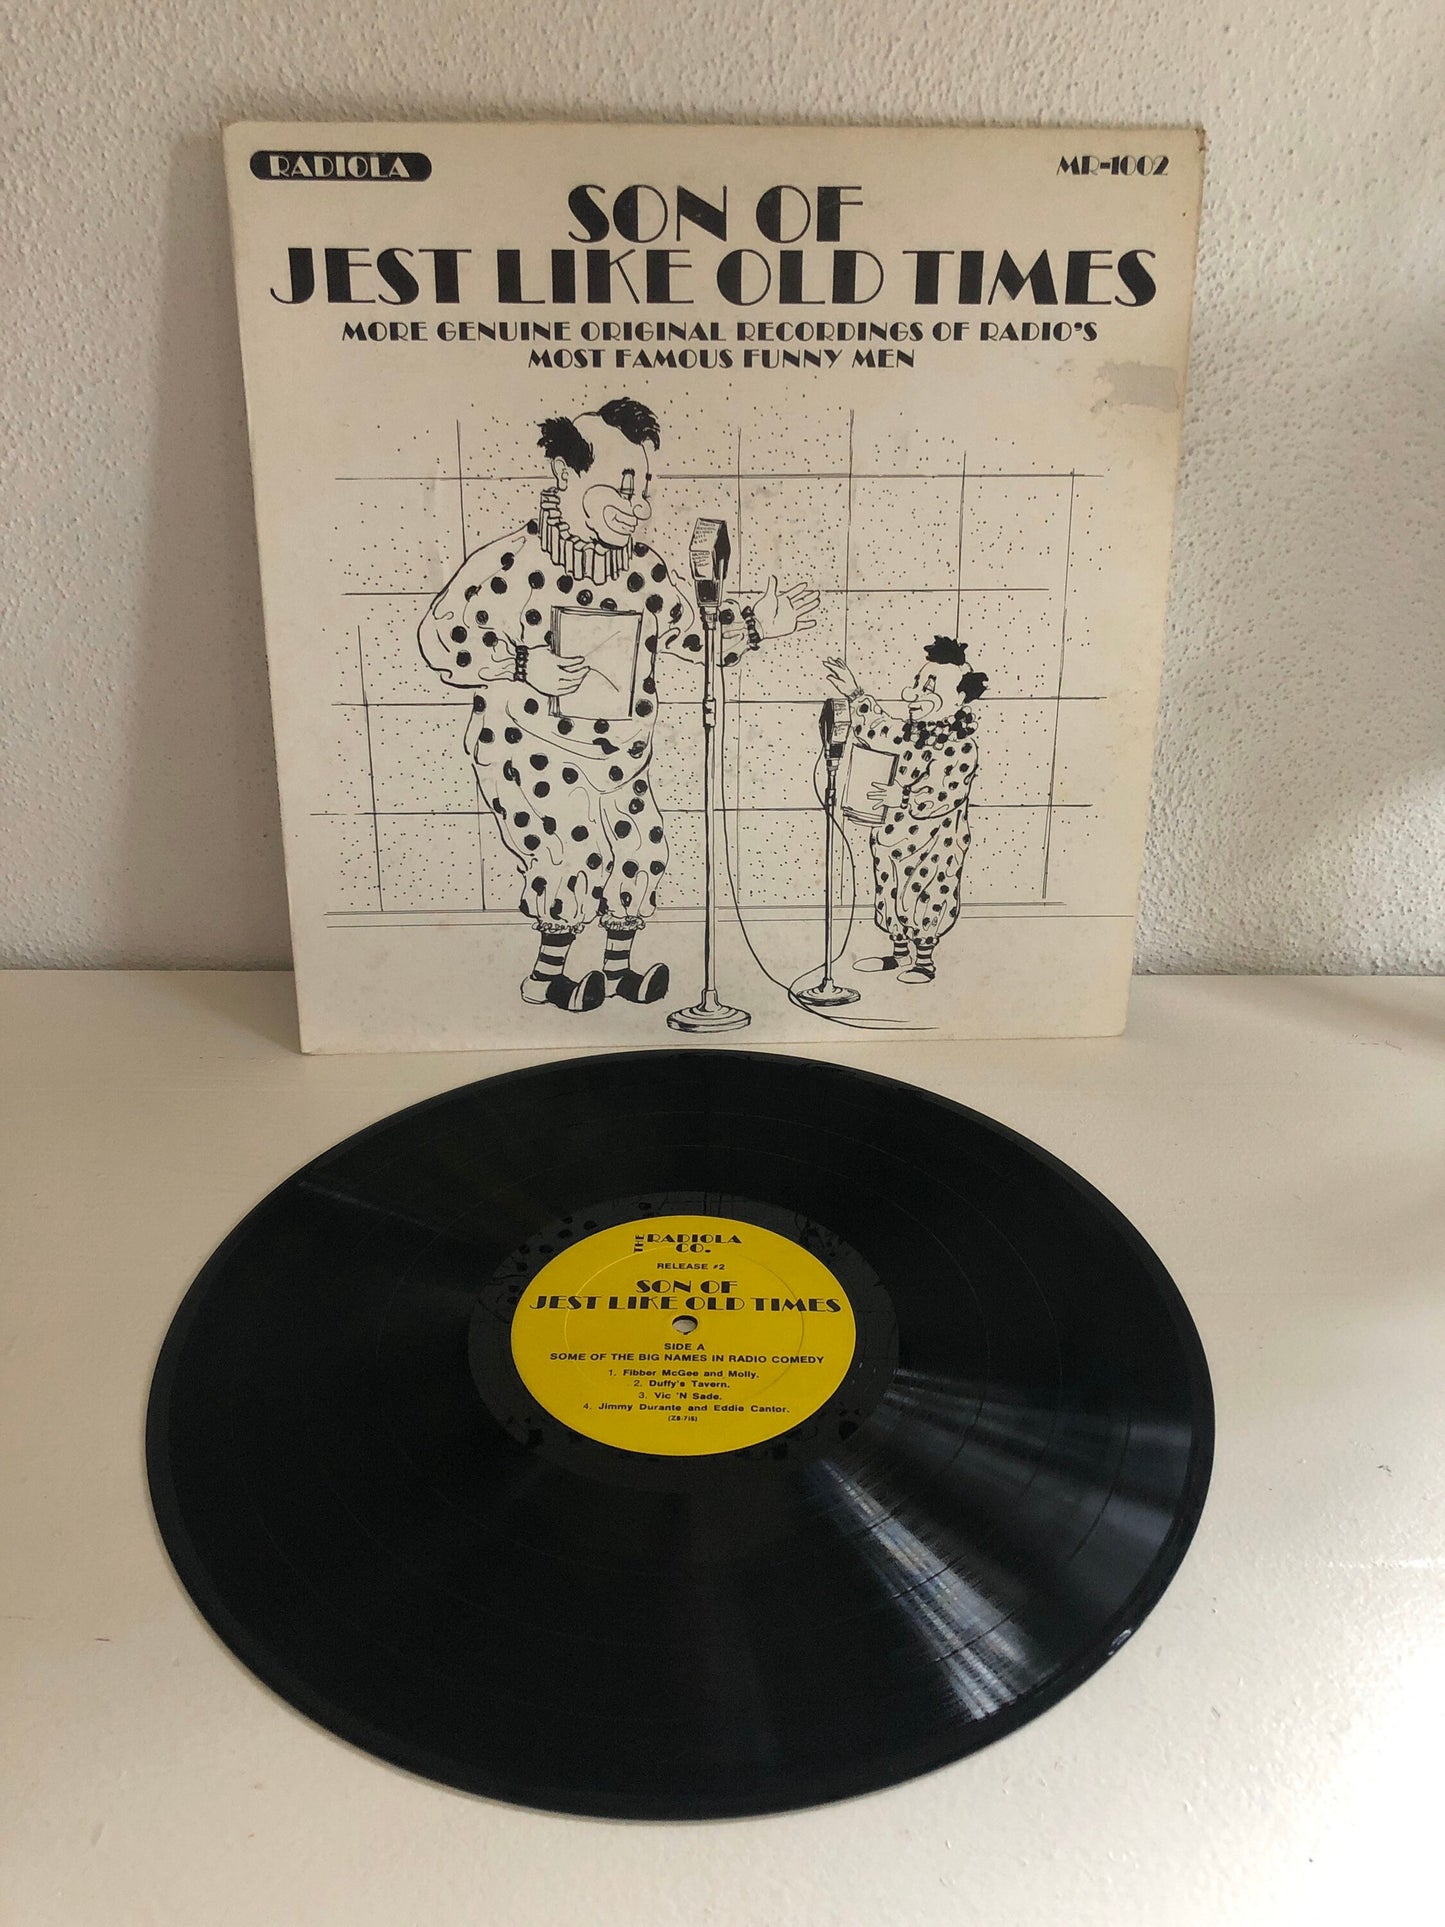 Son Of Jest Like Old Times: More Genuine Original Recordings Of Radio's Most Famous Funny Men Vintage Comedy Record Fibber McGee and Molly